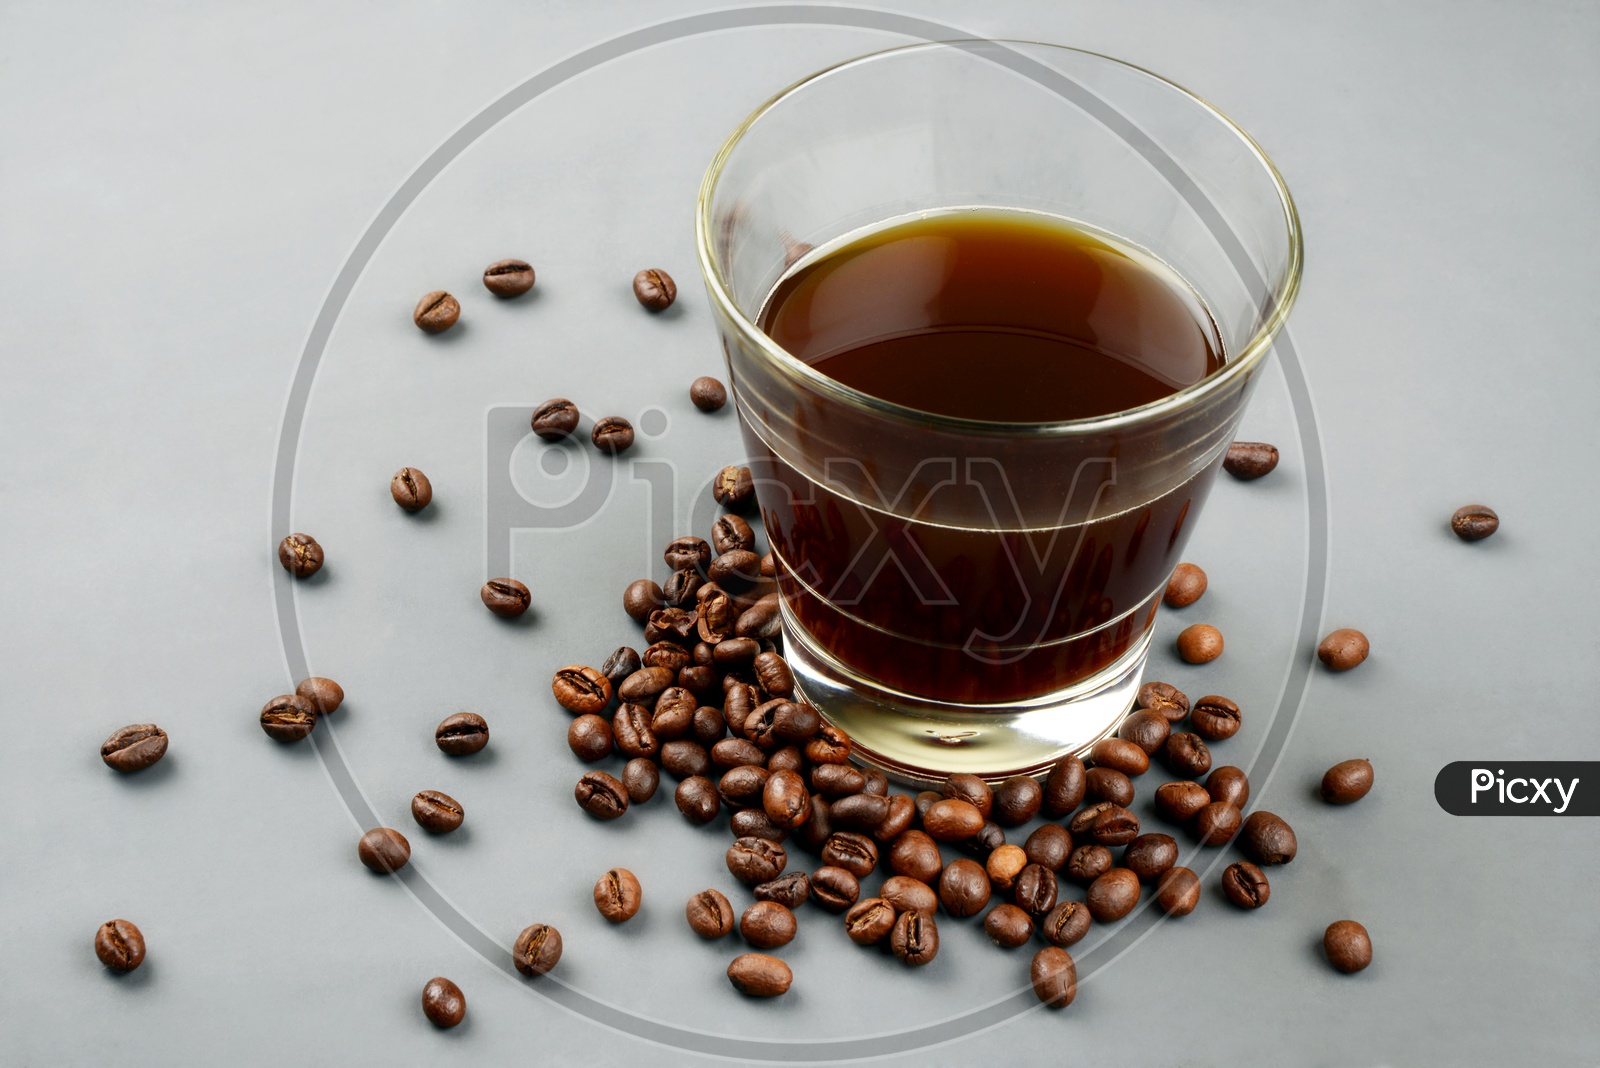 Roasted Coffee beans with a glass of black coffee